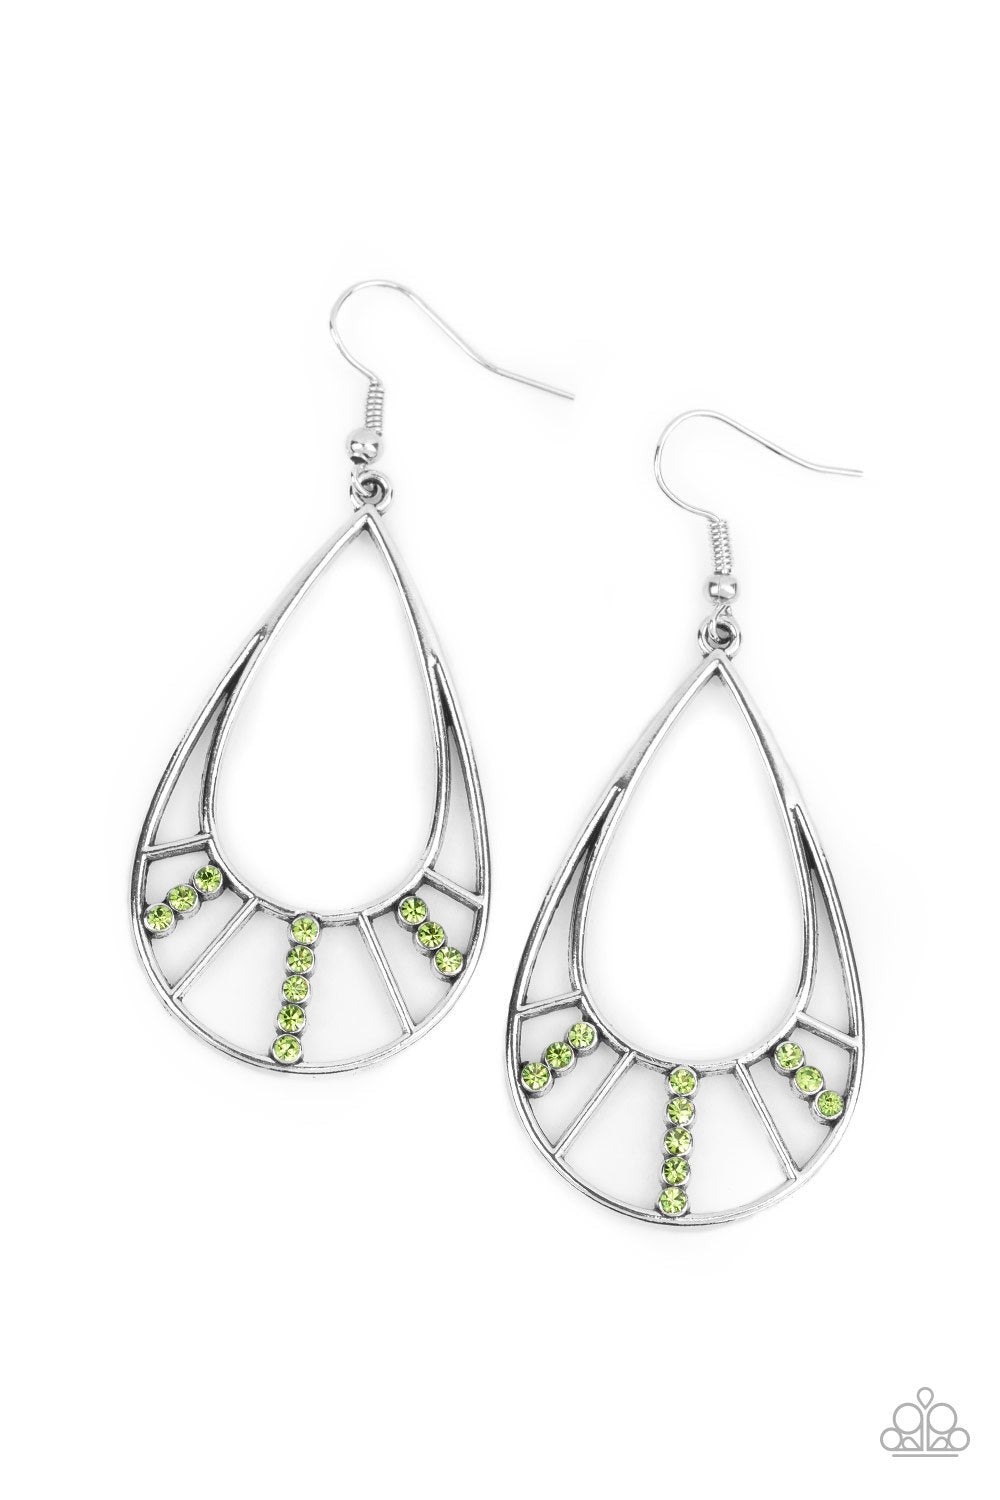 Line Crossing Sparkle Green Rhinestone Earrings - Paparazzi Accessories-CarasShop.com - $5 Jewelry by Cara Jewels